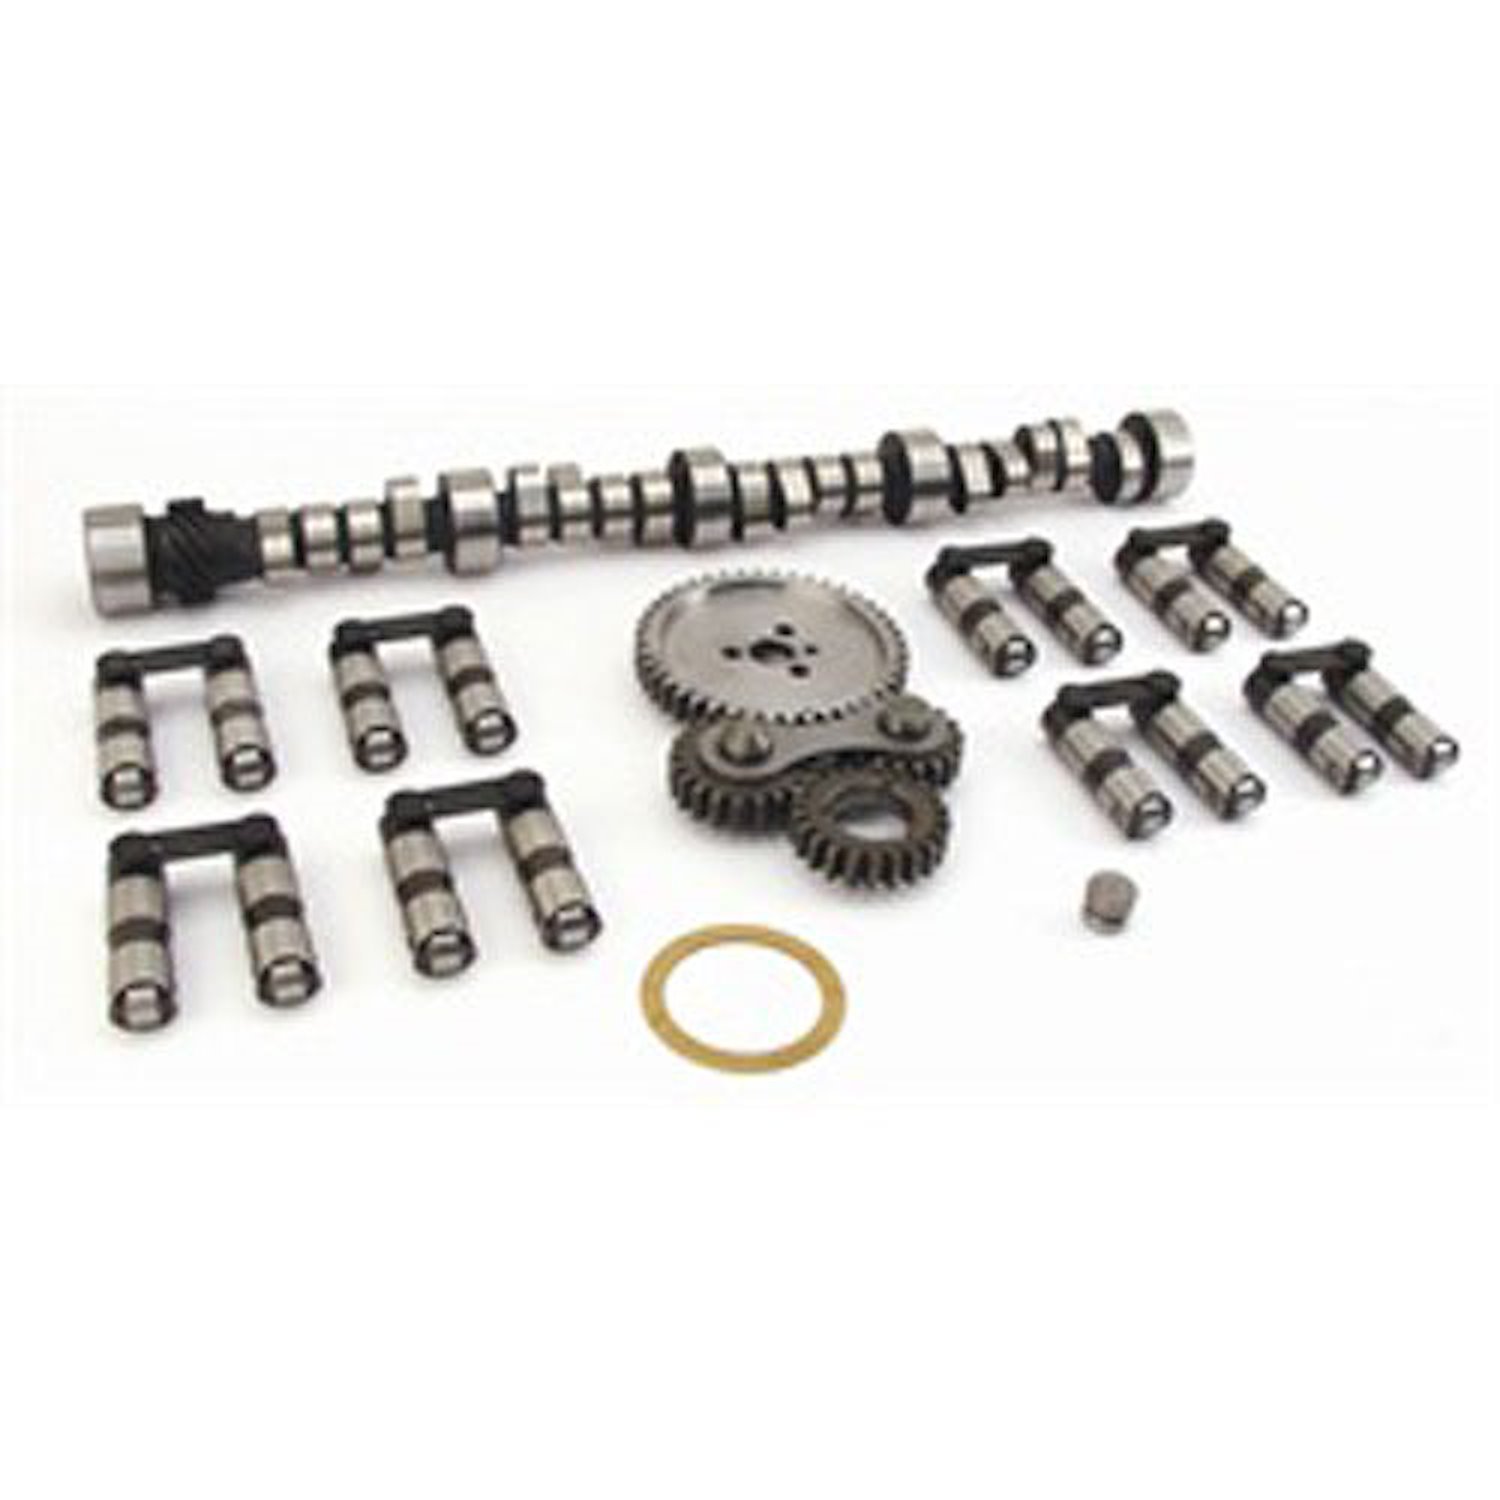 Thumpr Hydraulic Roller Camshaft, Lifters, & Gear Drive Kit Lift: .513"/.498"